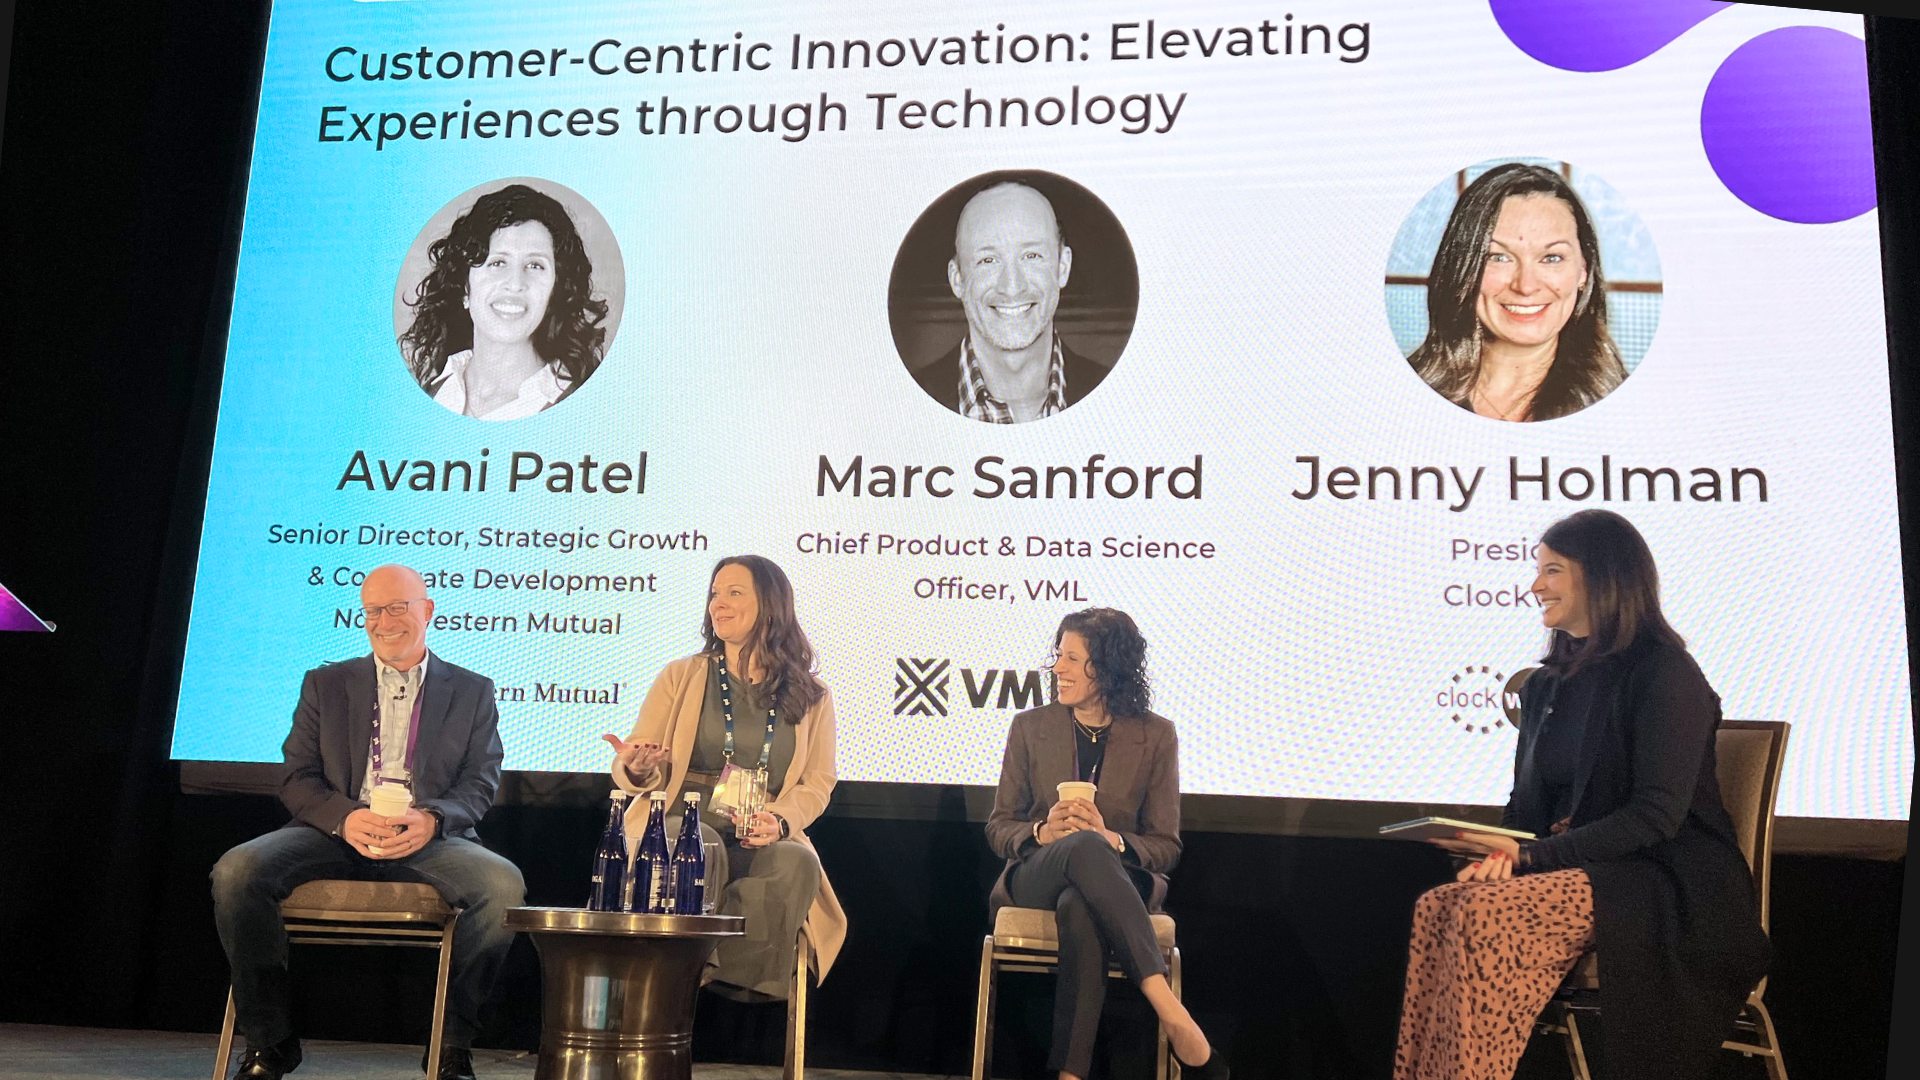 Clockwork President, Jenny Holman, on stage as a panel member for Customer-centric innovation – Elevating experience through technology at the GDS Digital Innovation Summit in Boston